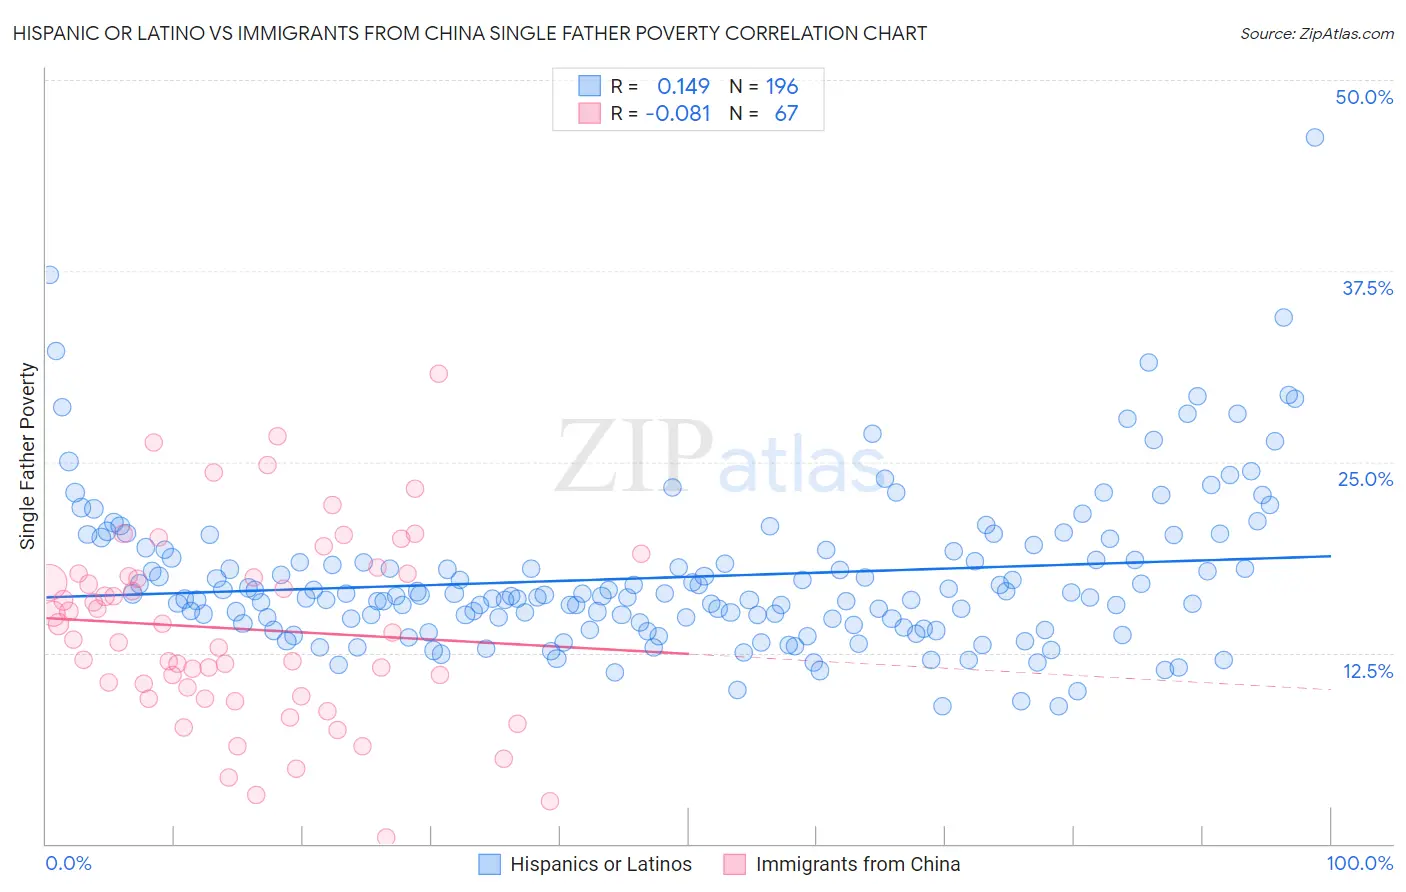 Hispanic or Latino vs Immigrants from China Single Father Poverty